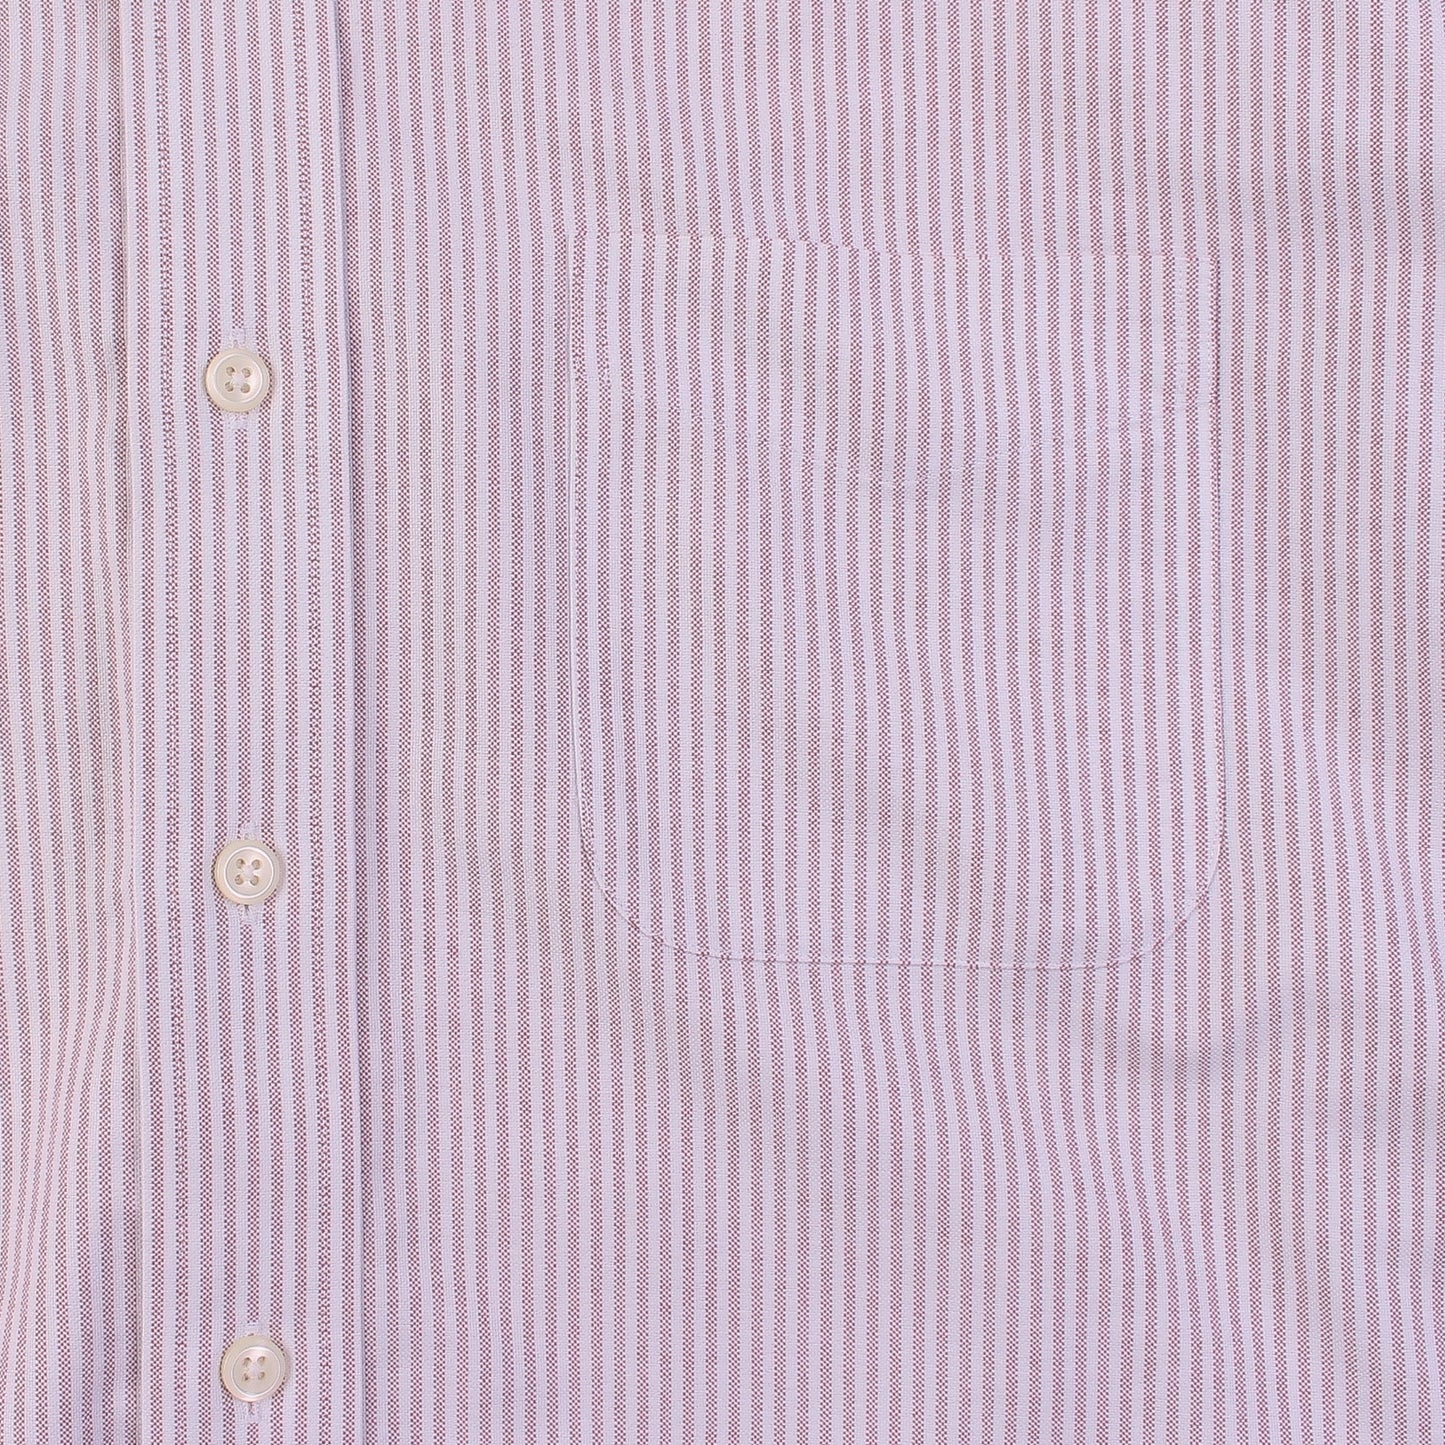 Vintage Shirt - Pink and White Stripe - American Madness